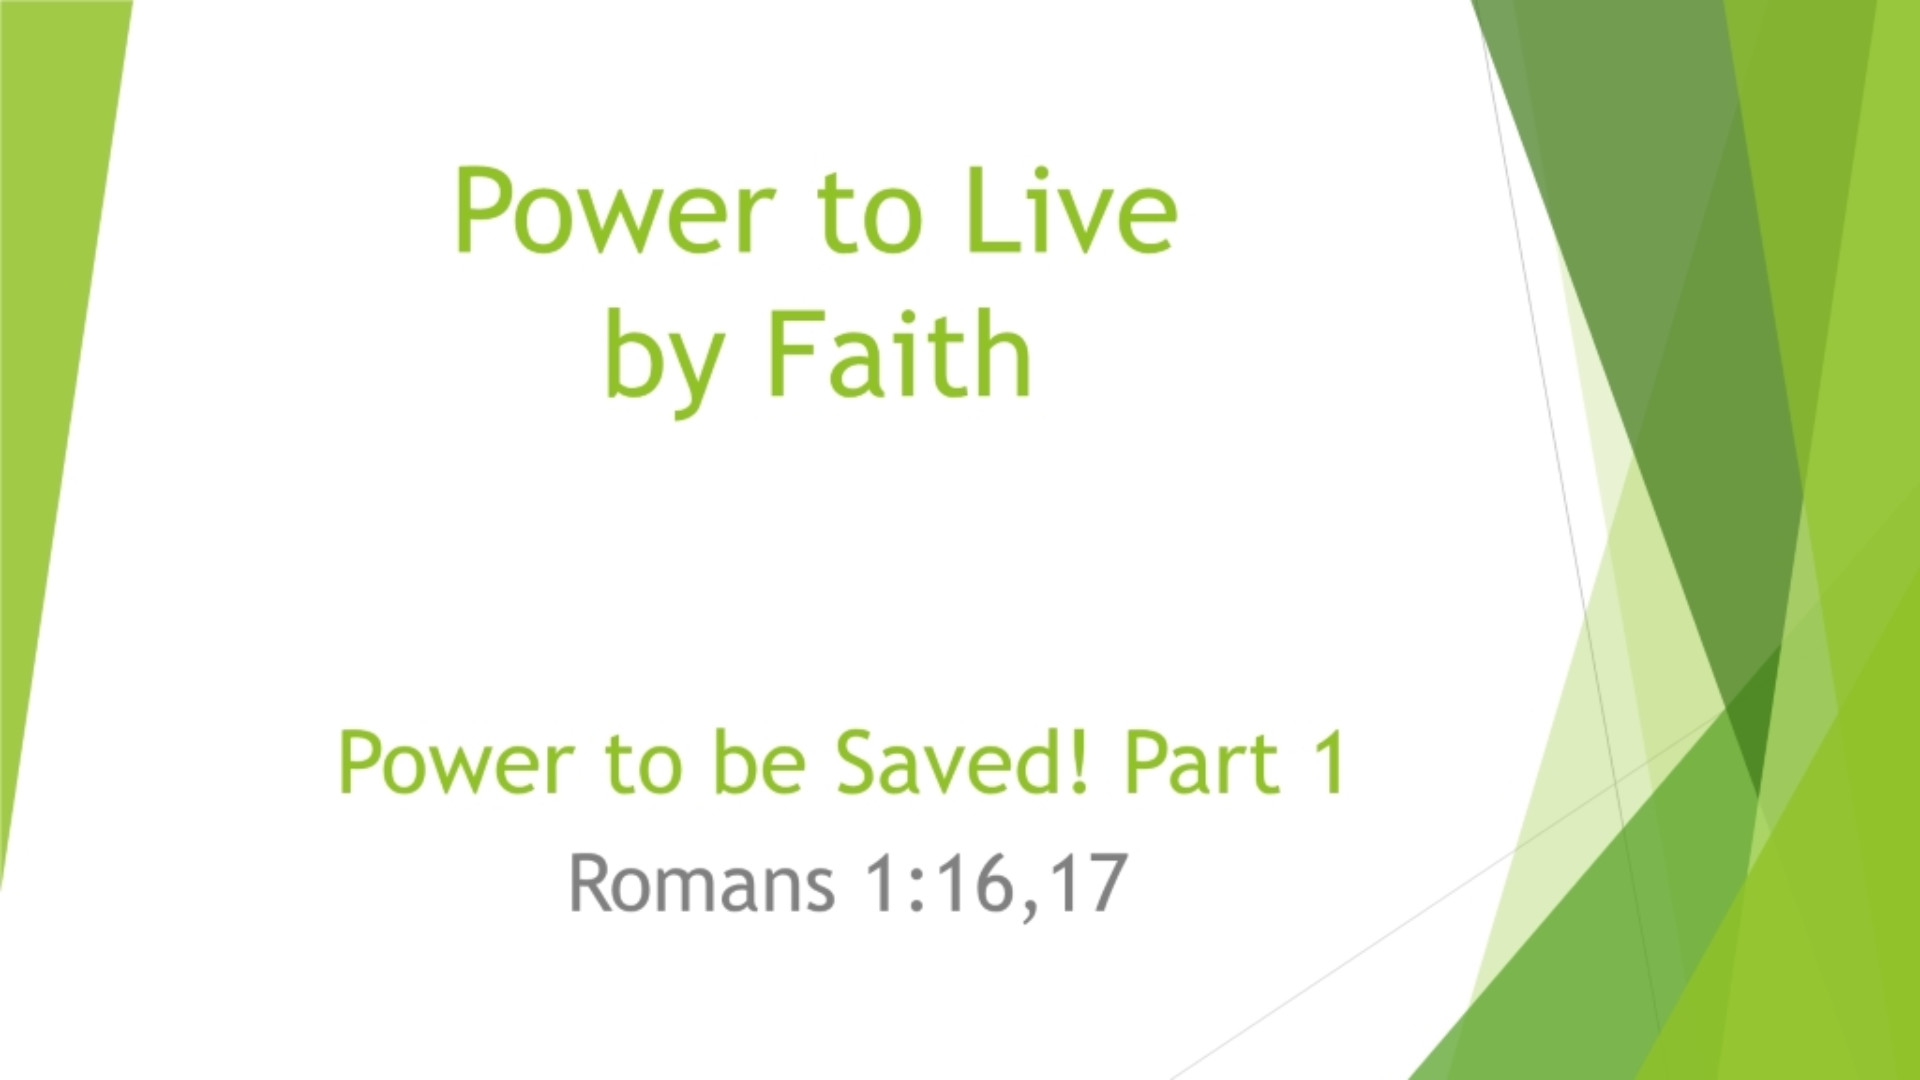 1920x1080 Pastor Curt starts the new series; Power to live by Faith with a message of  the Power to be Saved from Romans 1:16-17.